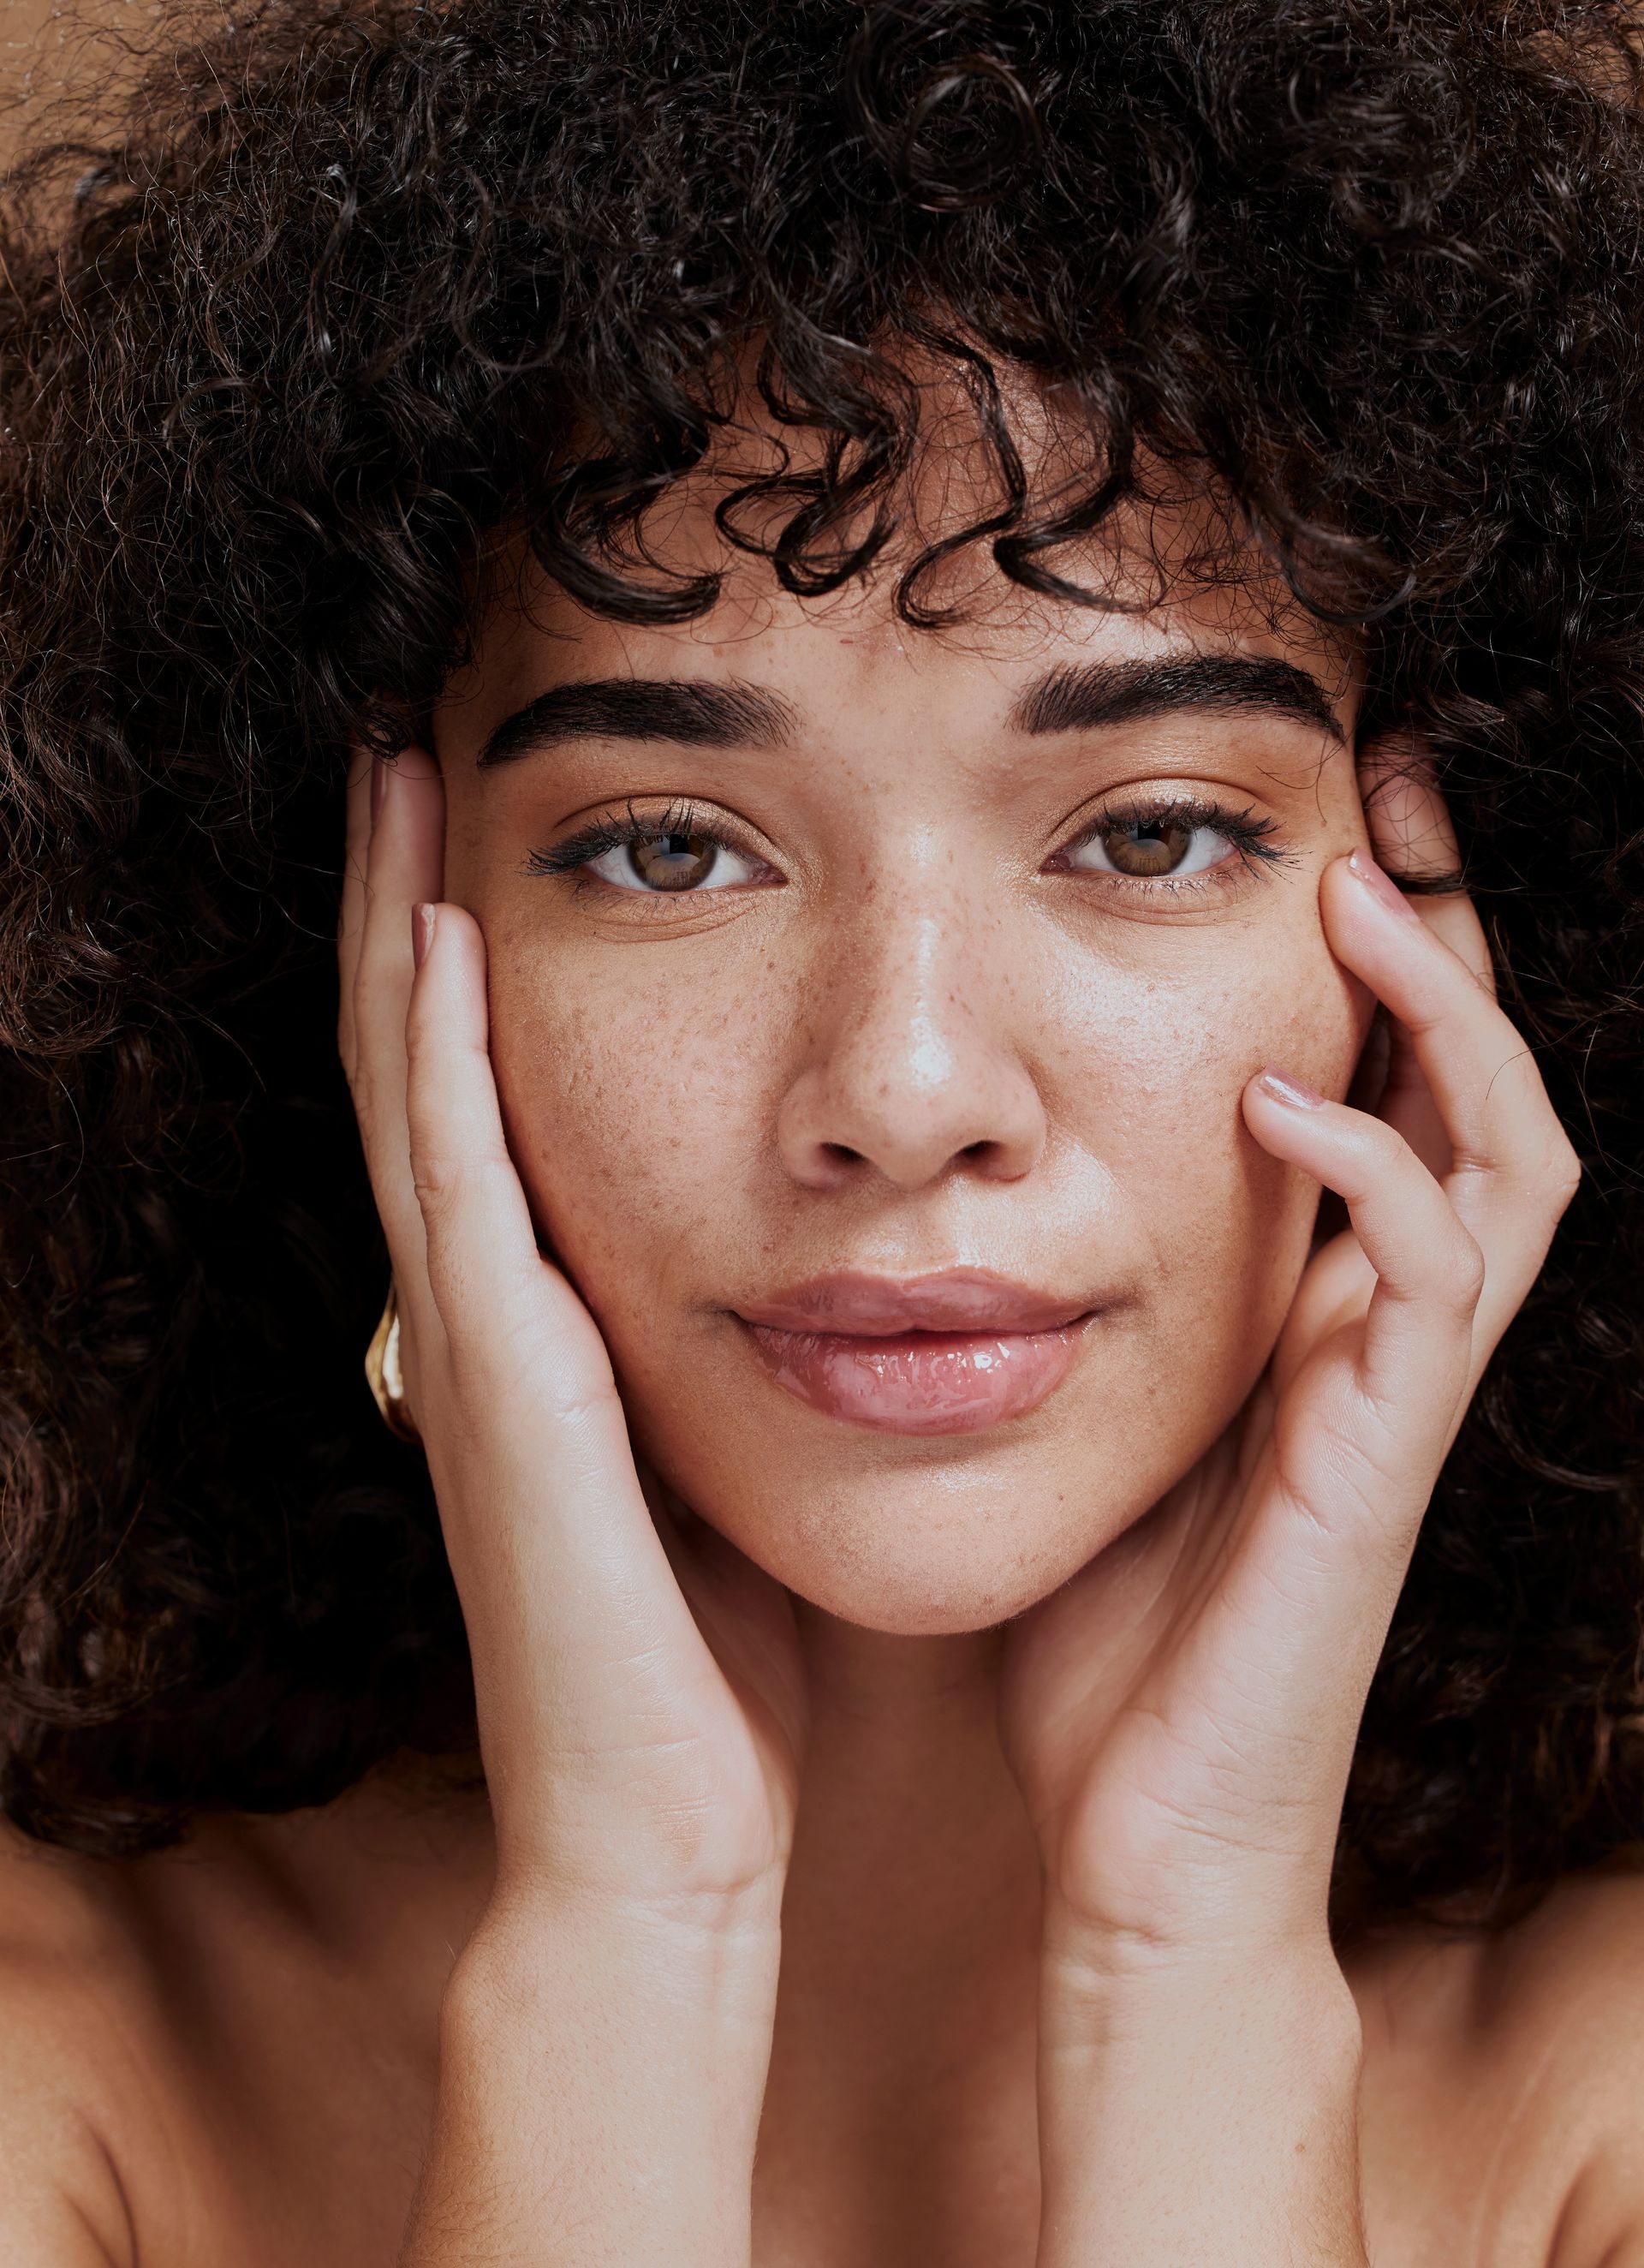 a woman with curly hair and freckles is touching her face with her hands .